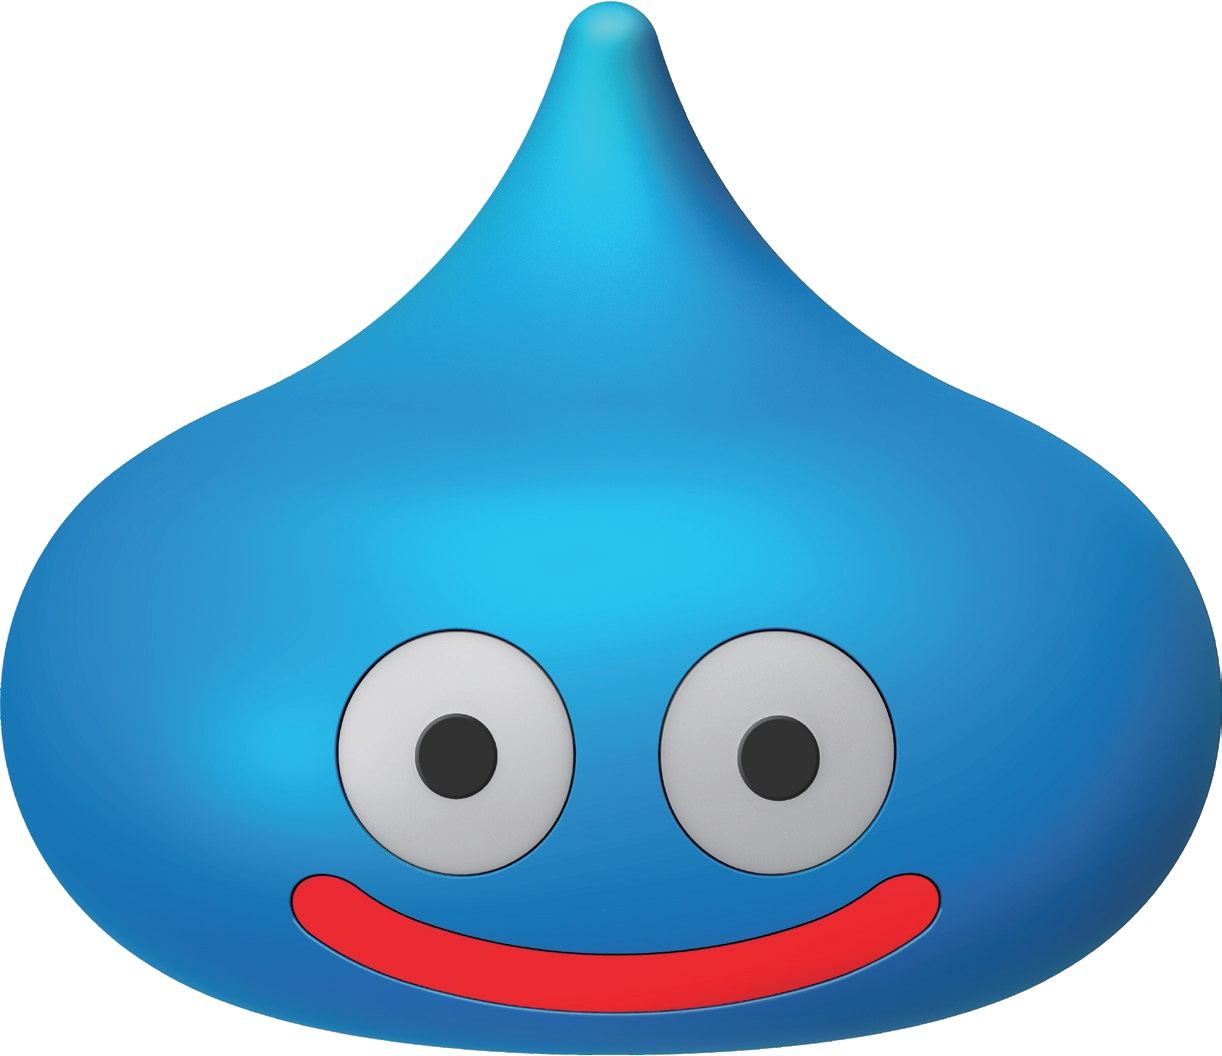 Dragon Quest slime controller returns to Switch 